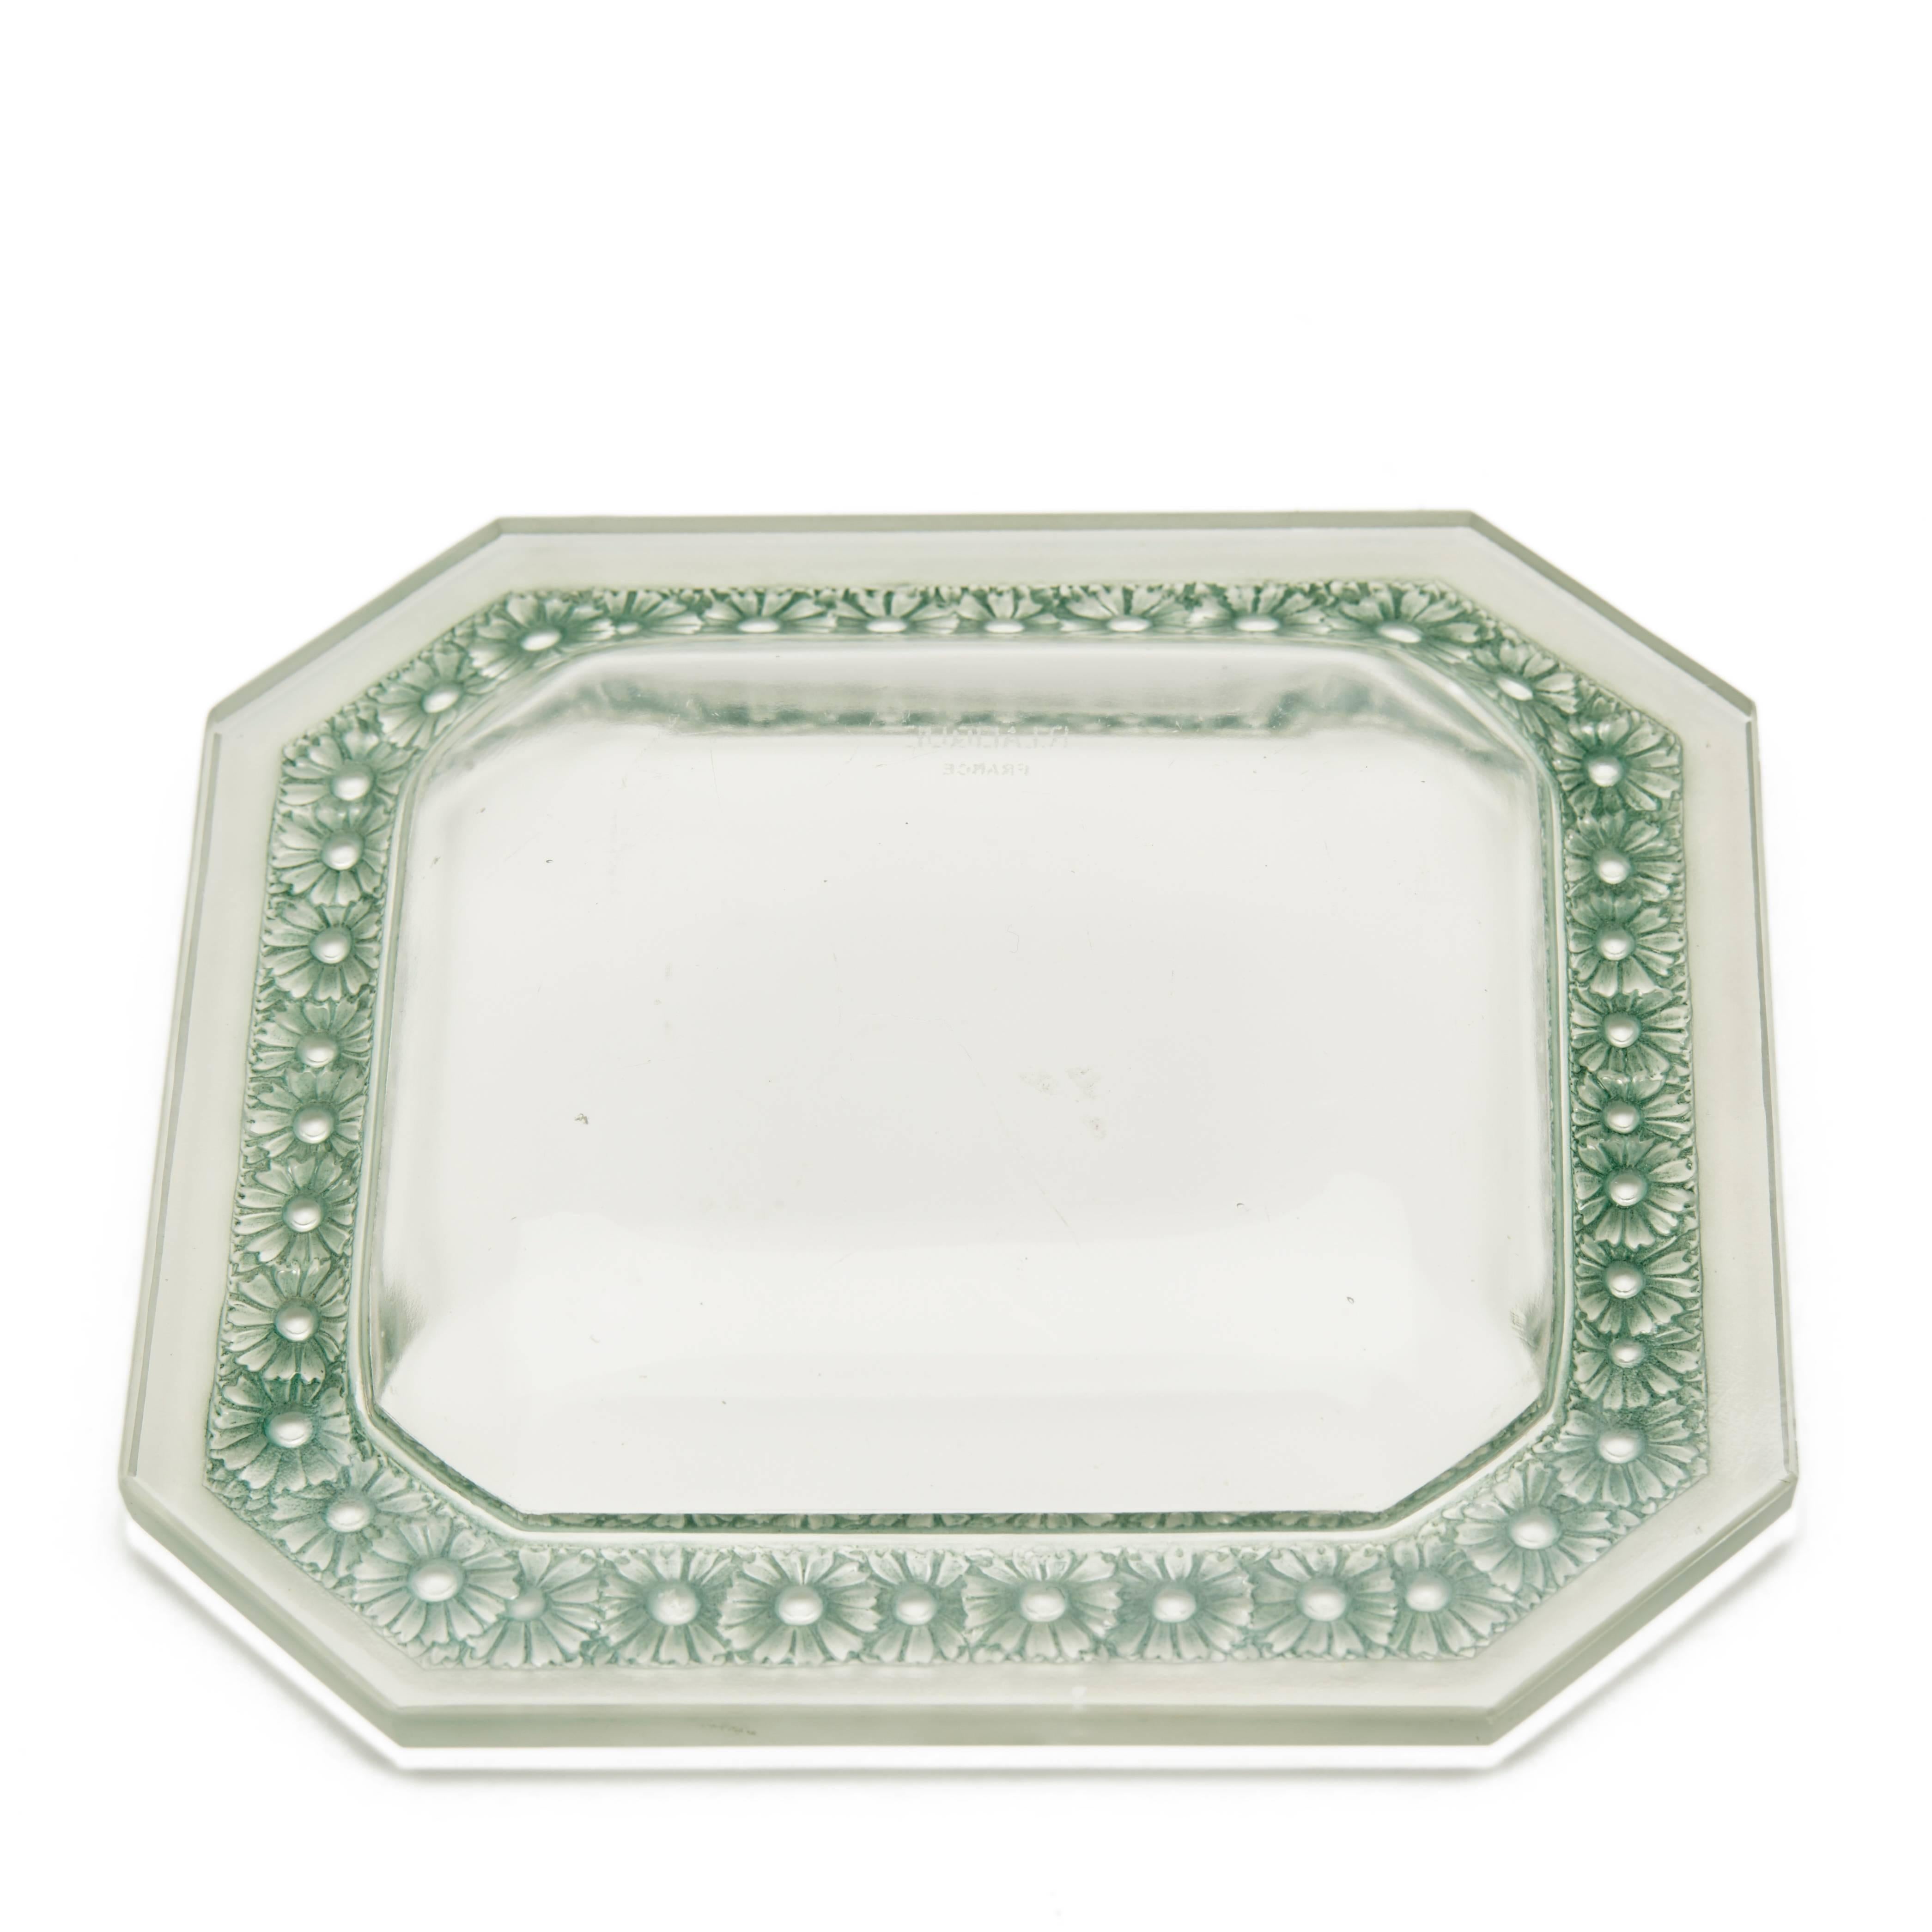 A fine vintage Rene Lalique Paquerettes pattern glass dish of square form the raised rim with canted corners and finely moulded with flower heads highlighted in green set with a frosted glass rim with a clear glass body. The dish has an R Lalique,